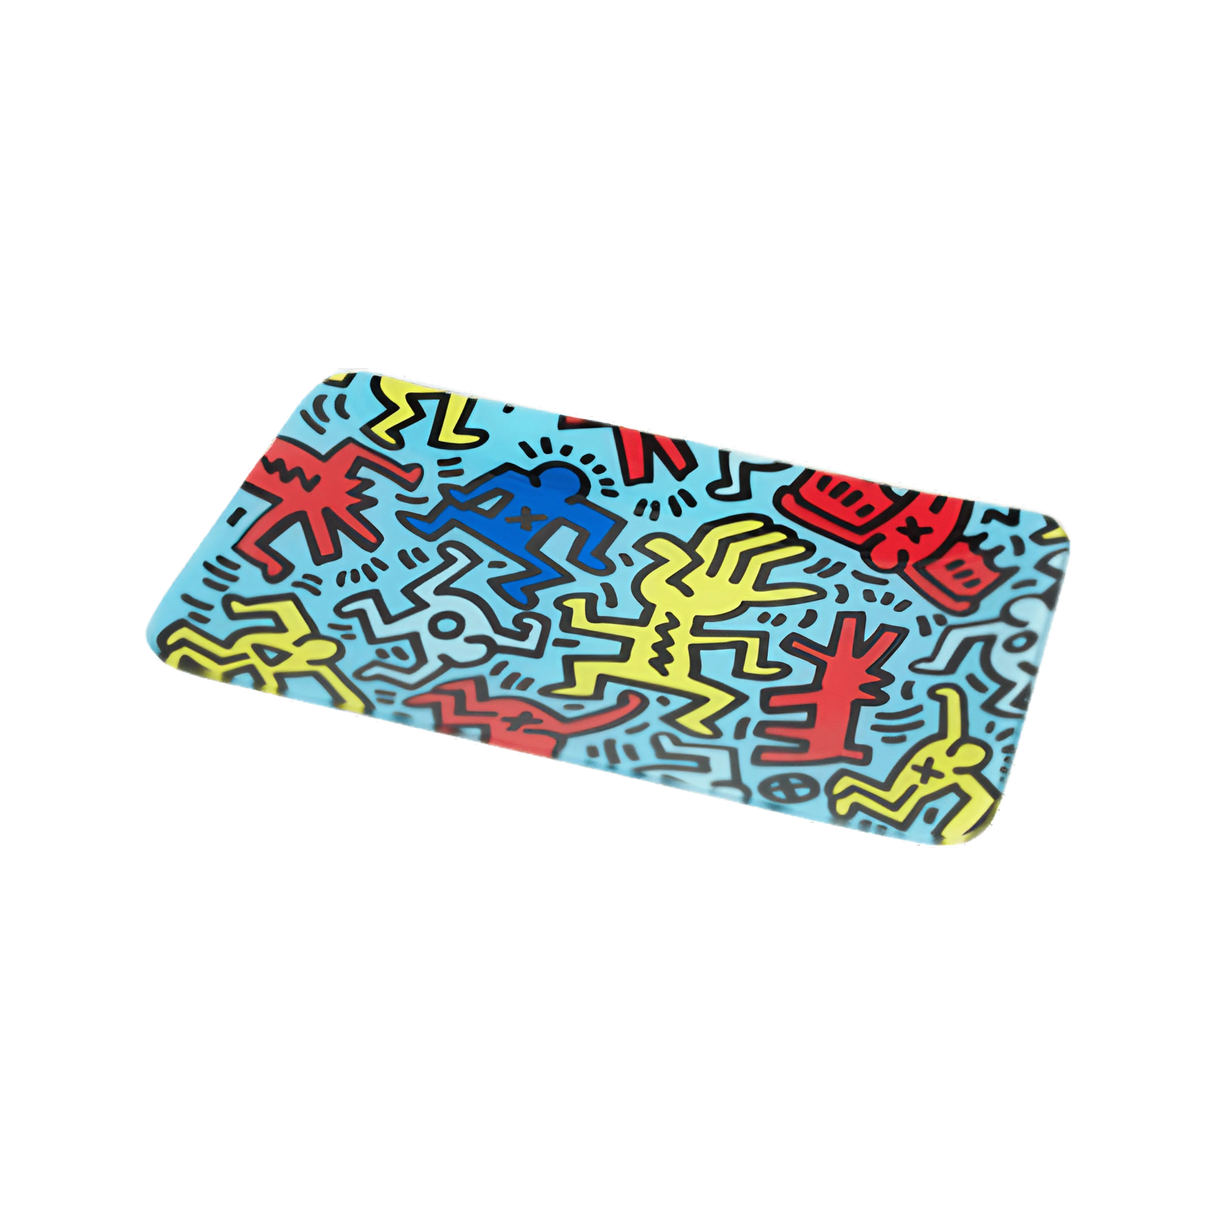 K.Haring Glass Collection rolling tray with vibrant abstract art design - top view